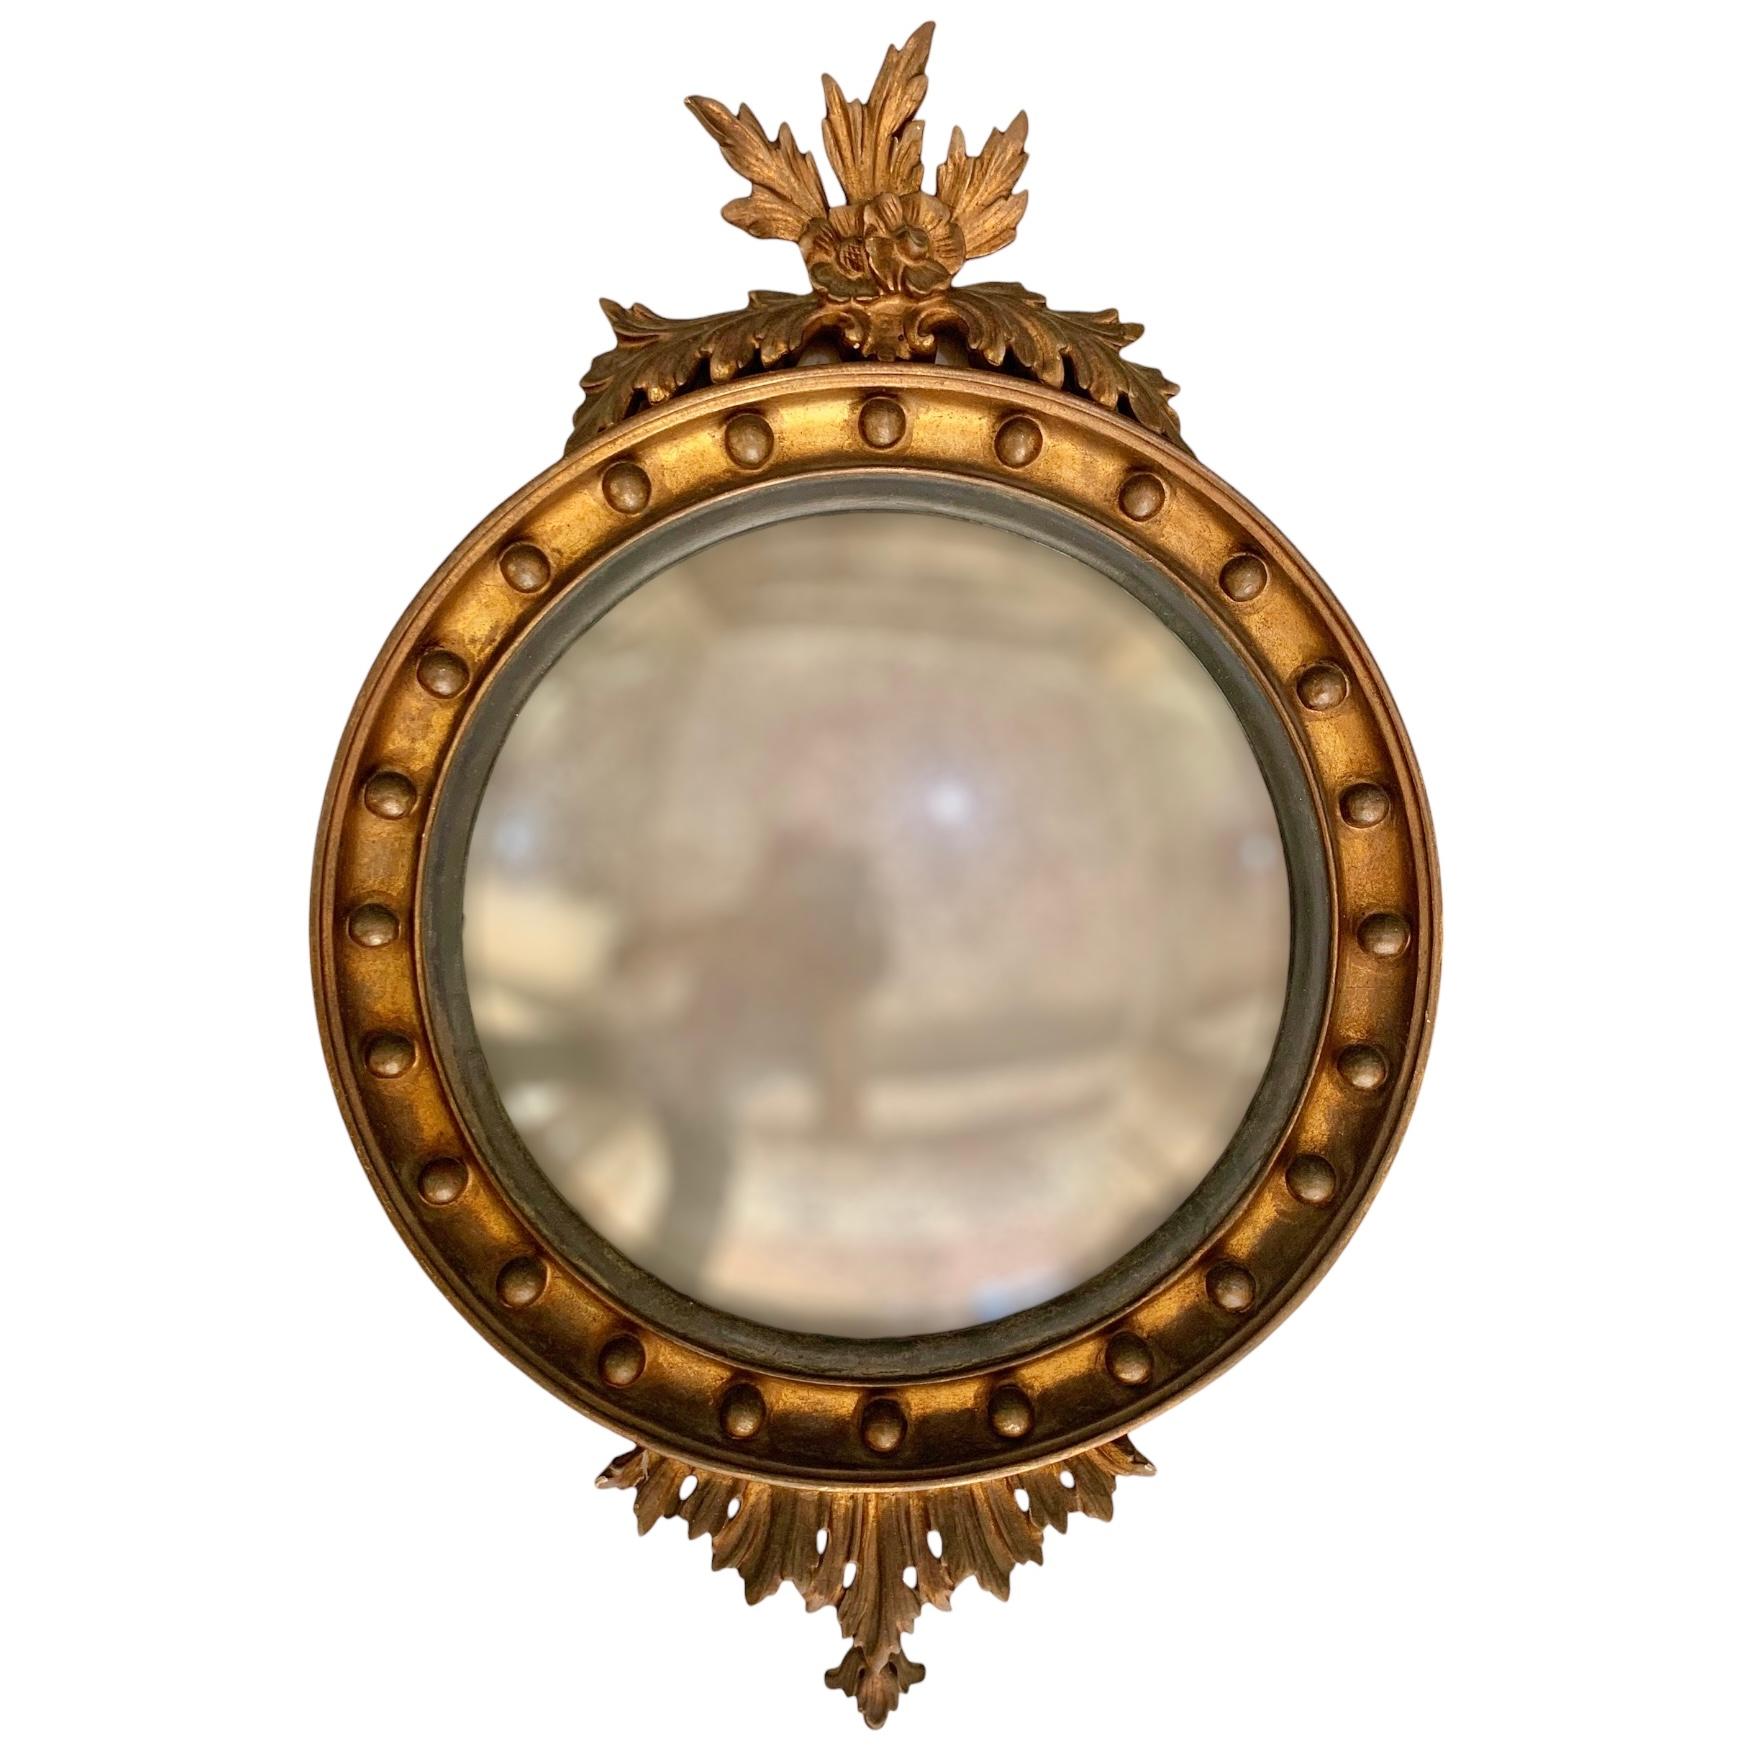 LARGE GILT NEOCLASSICAL MIRROR WITH A CARVED DECORAION

in its original condition and gilding despite the age

the circular plate in a receded frame applied with balls

France, early 19th Century-